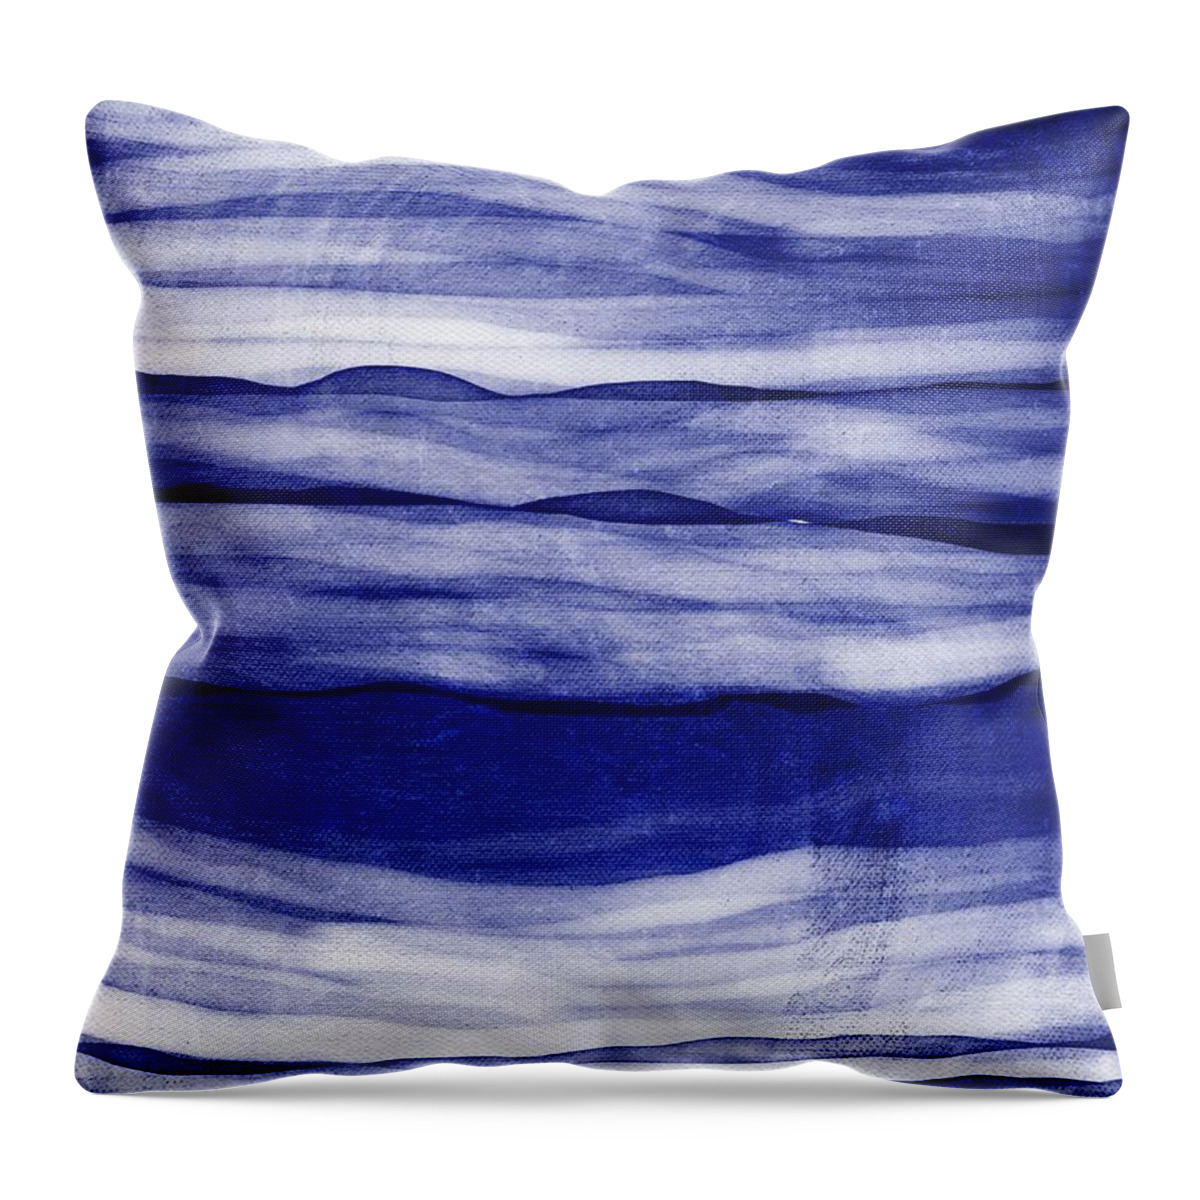 Wavy Throw Pillow featuring the painting Wavy Horizons Blue and White Stripes by Itsonlythemoon